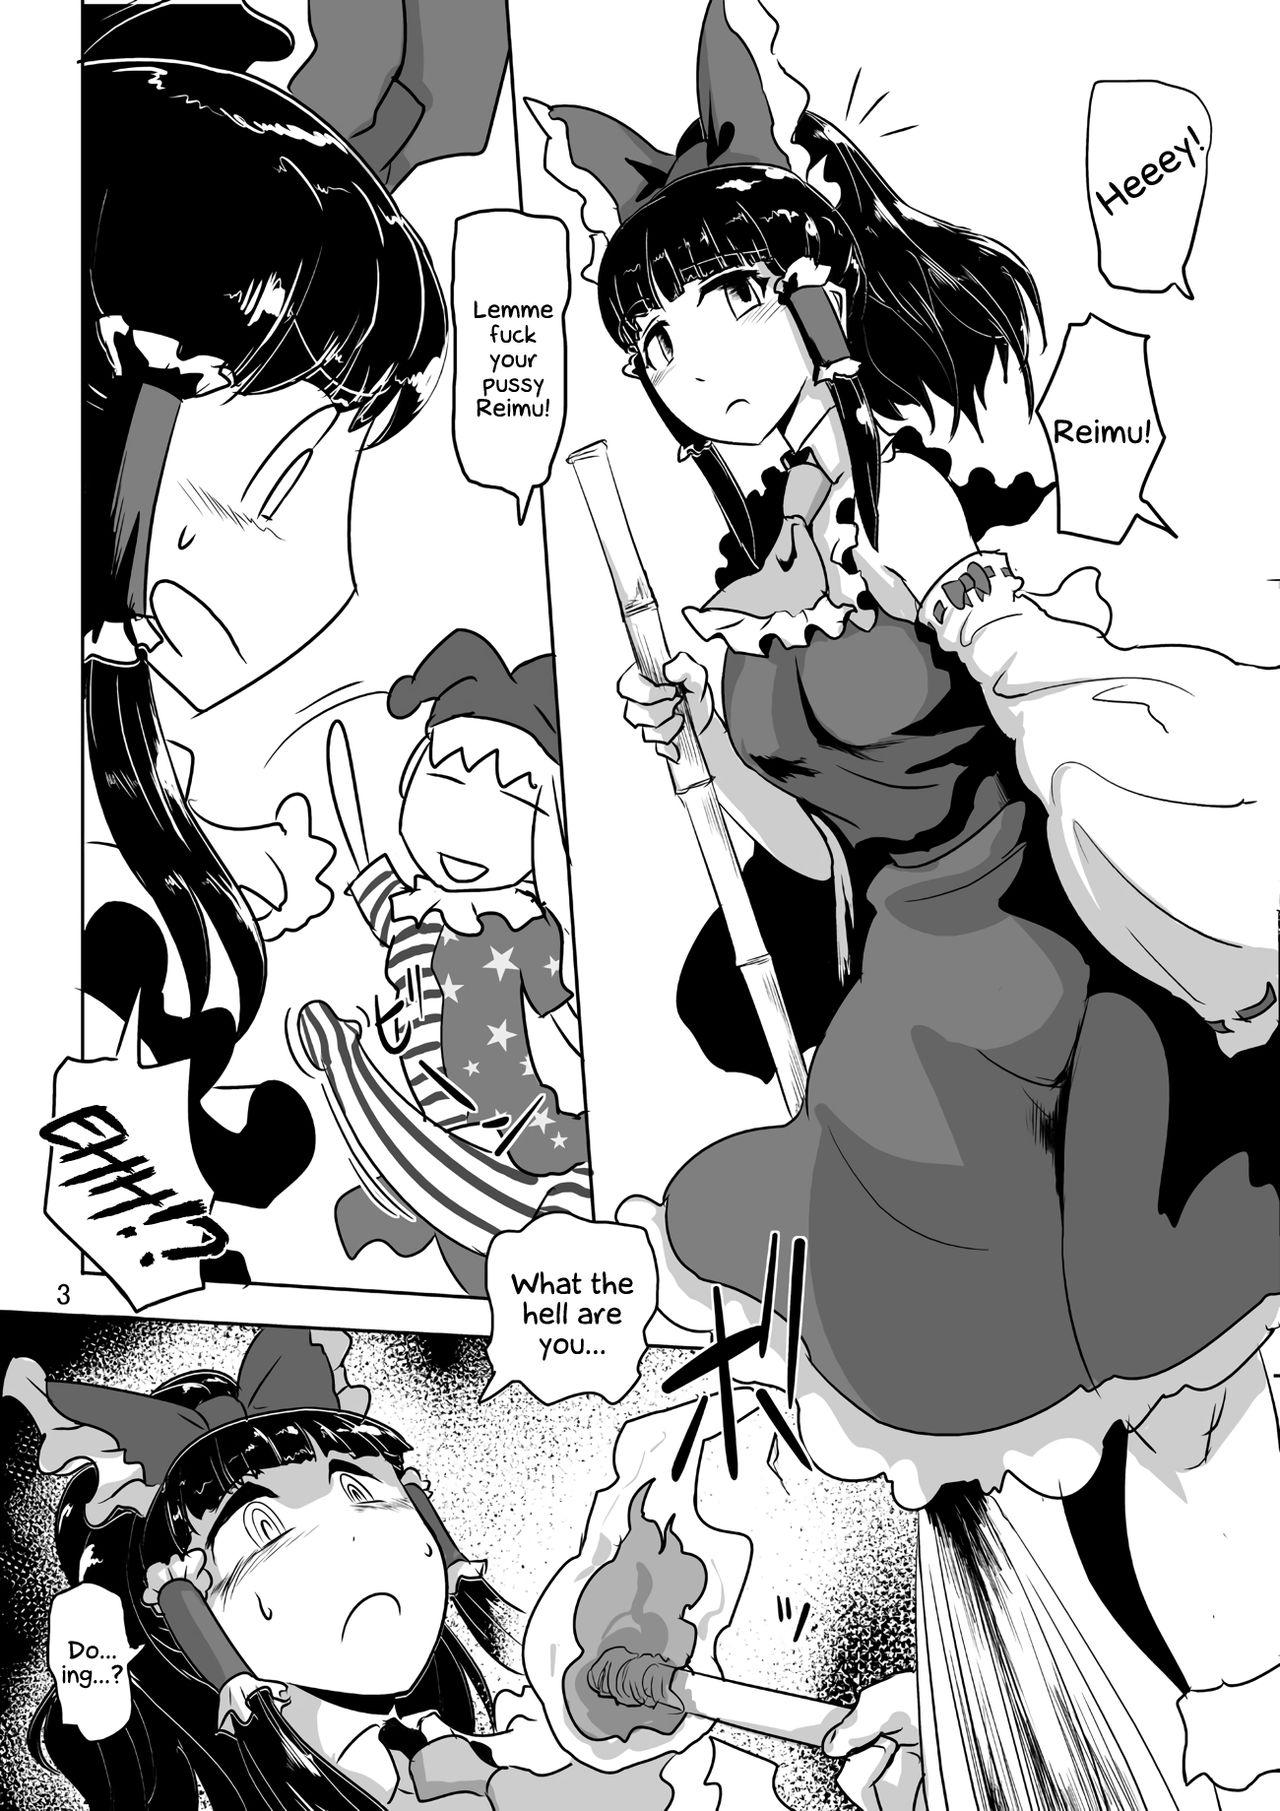 Old Young Jigoku no Tanetsuke Yousei | The Impregnating Fairy From Hell! - Touhou project Asstomouth - Page 4